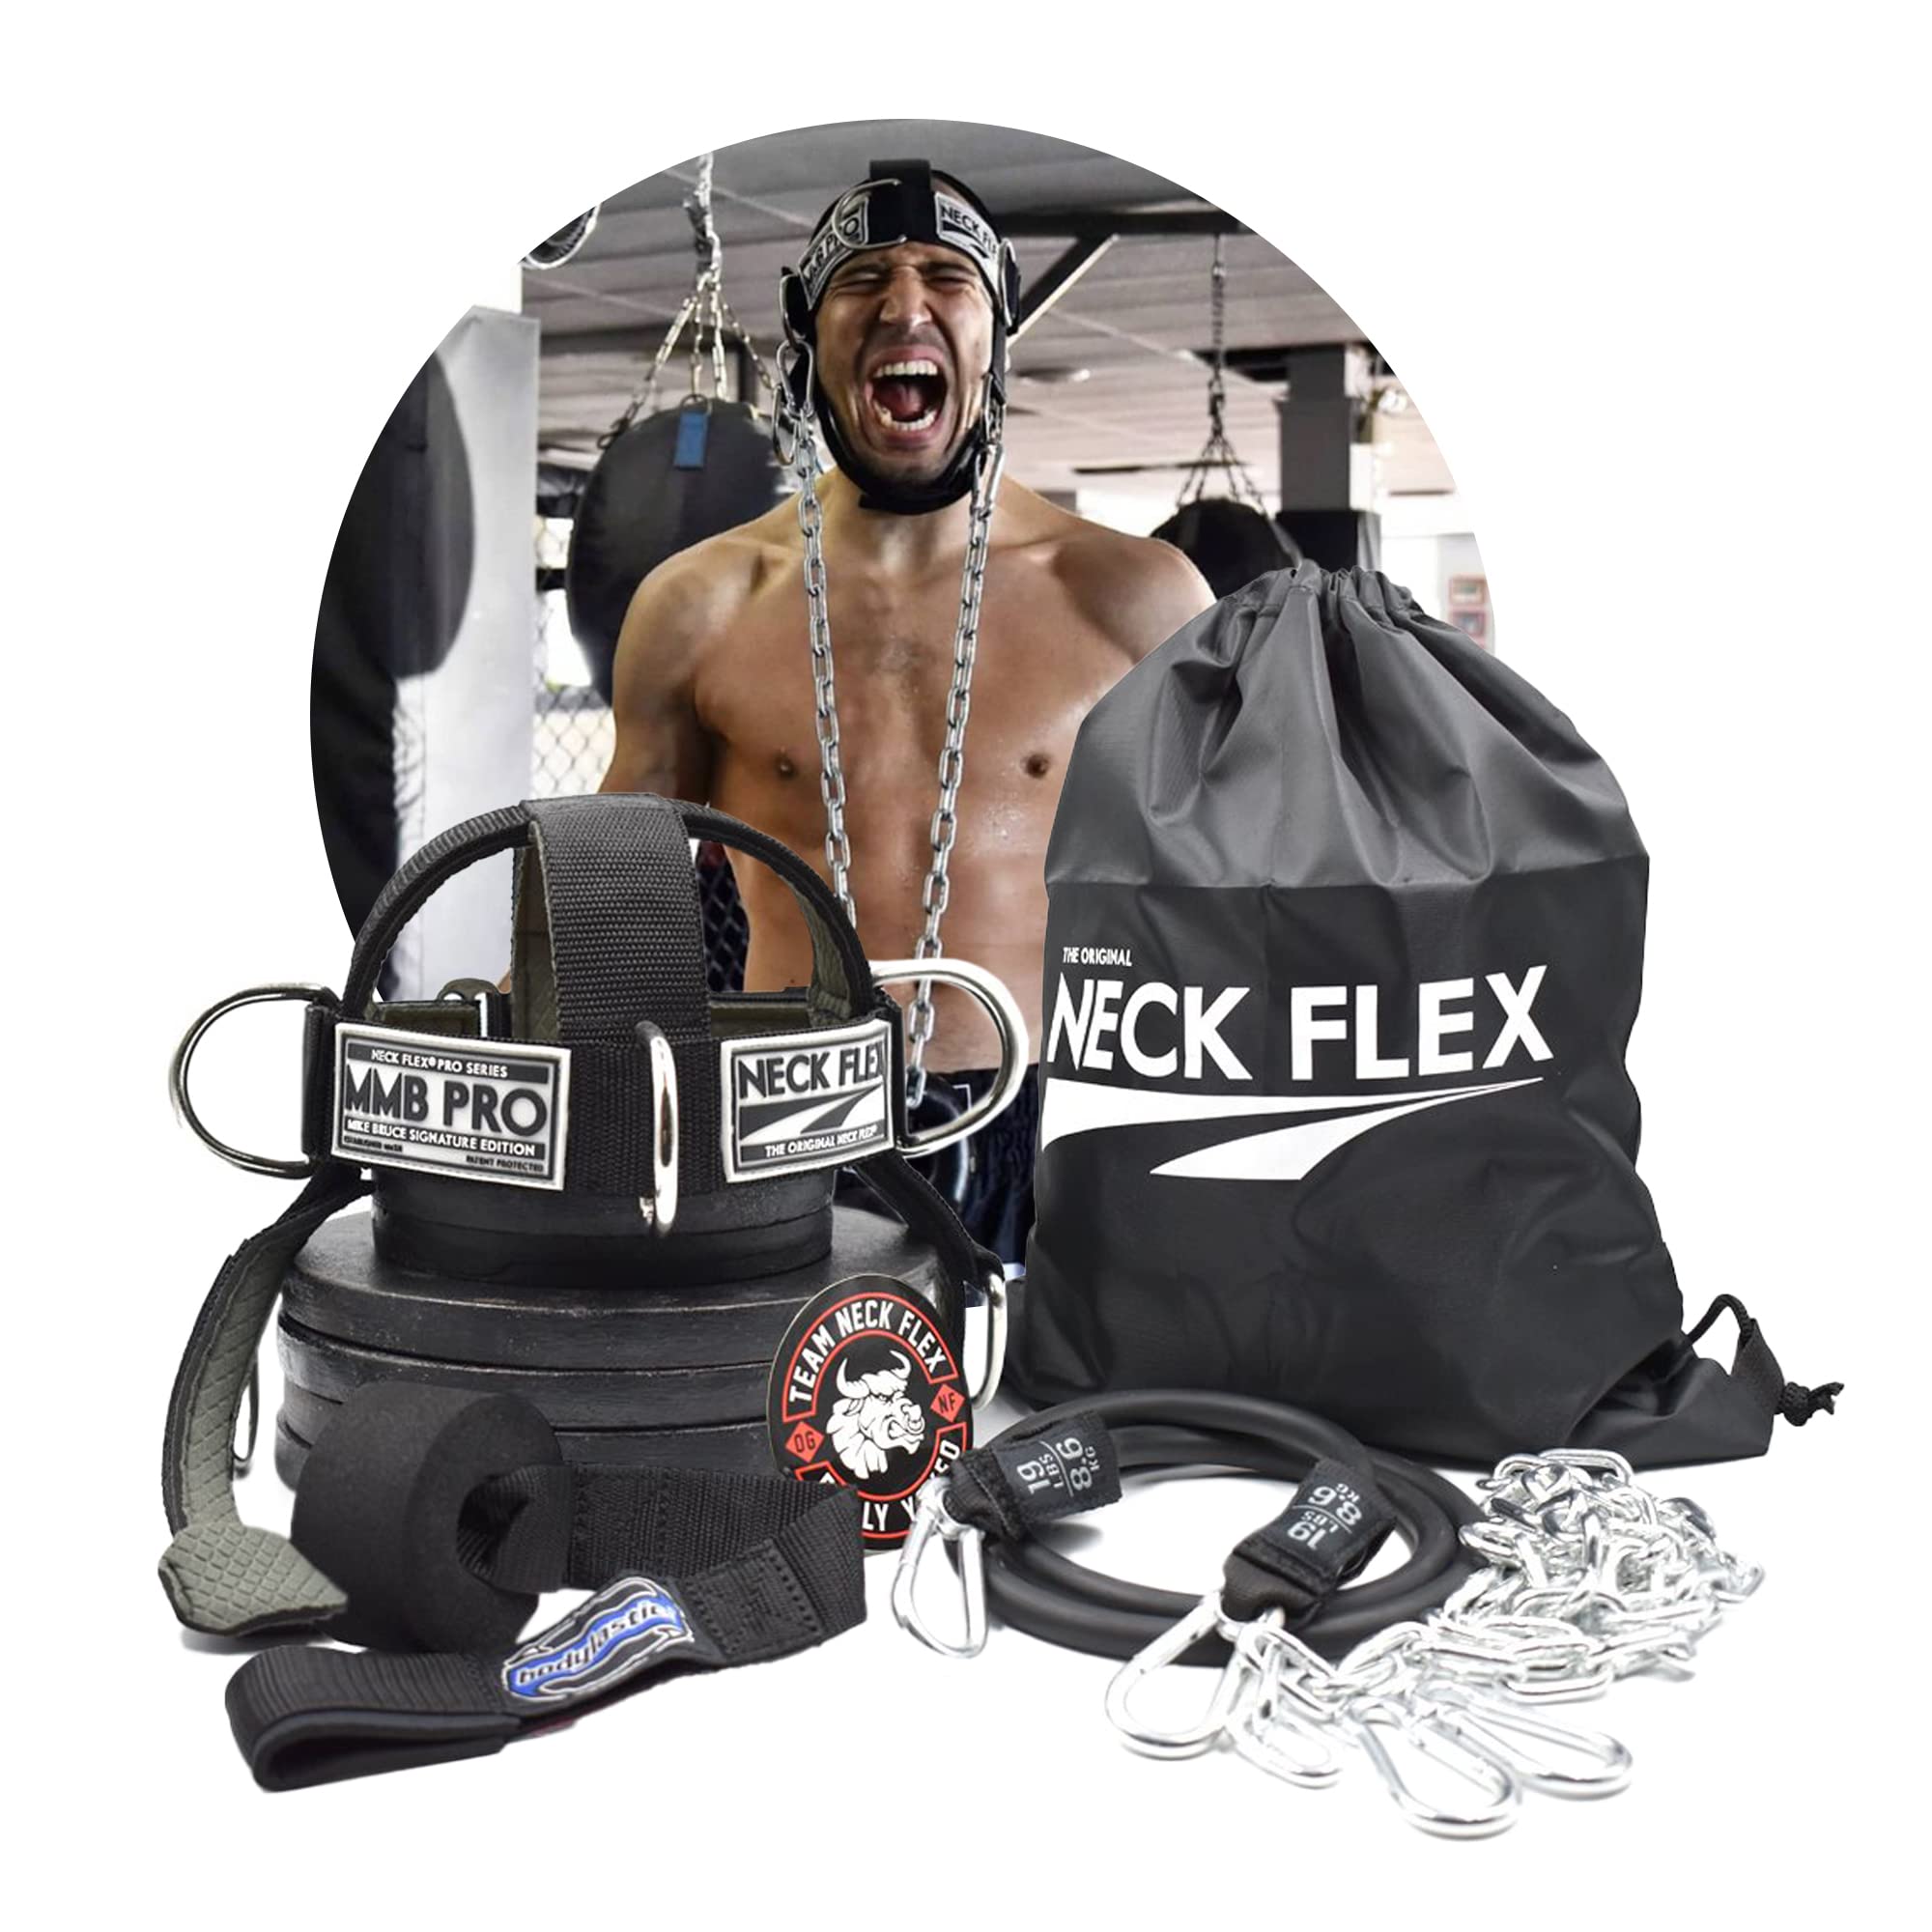 Neck harness for weight lifting - Gym, Fitness & Fighting sports